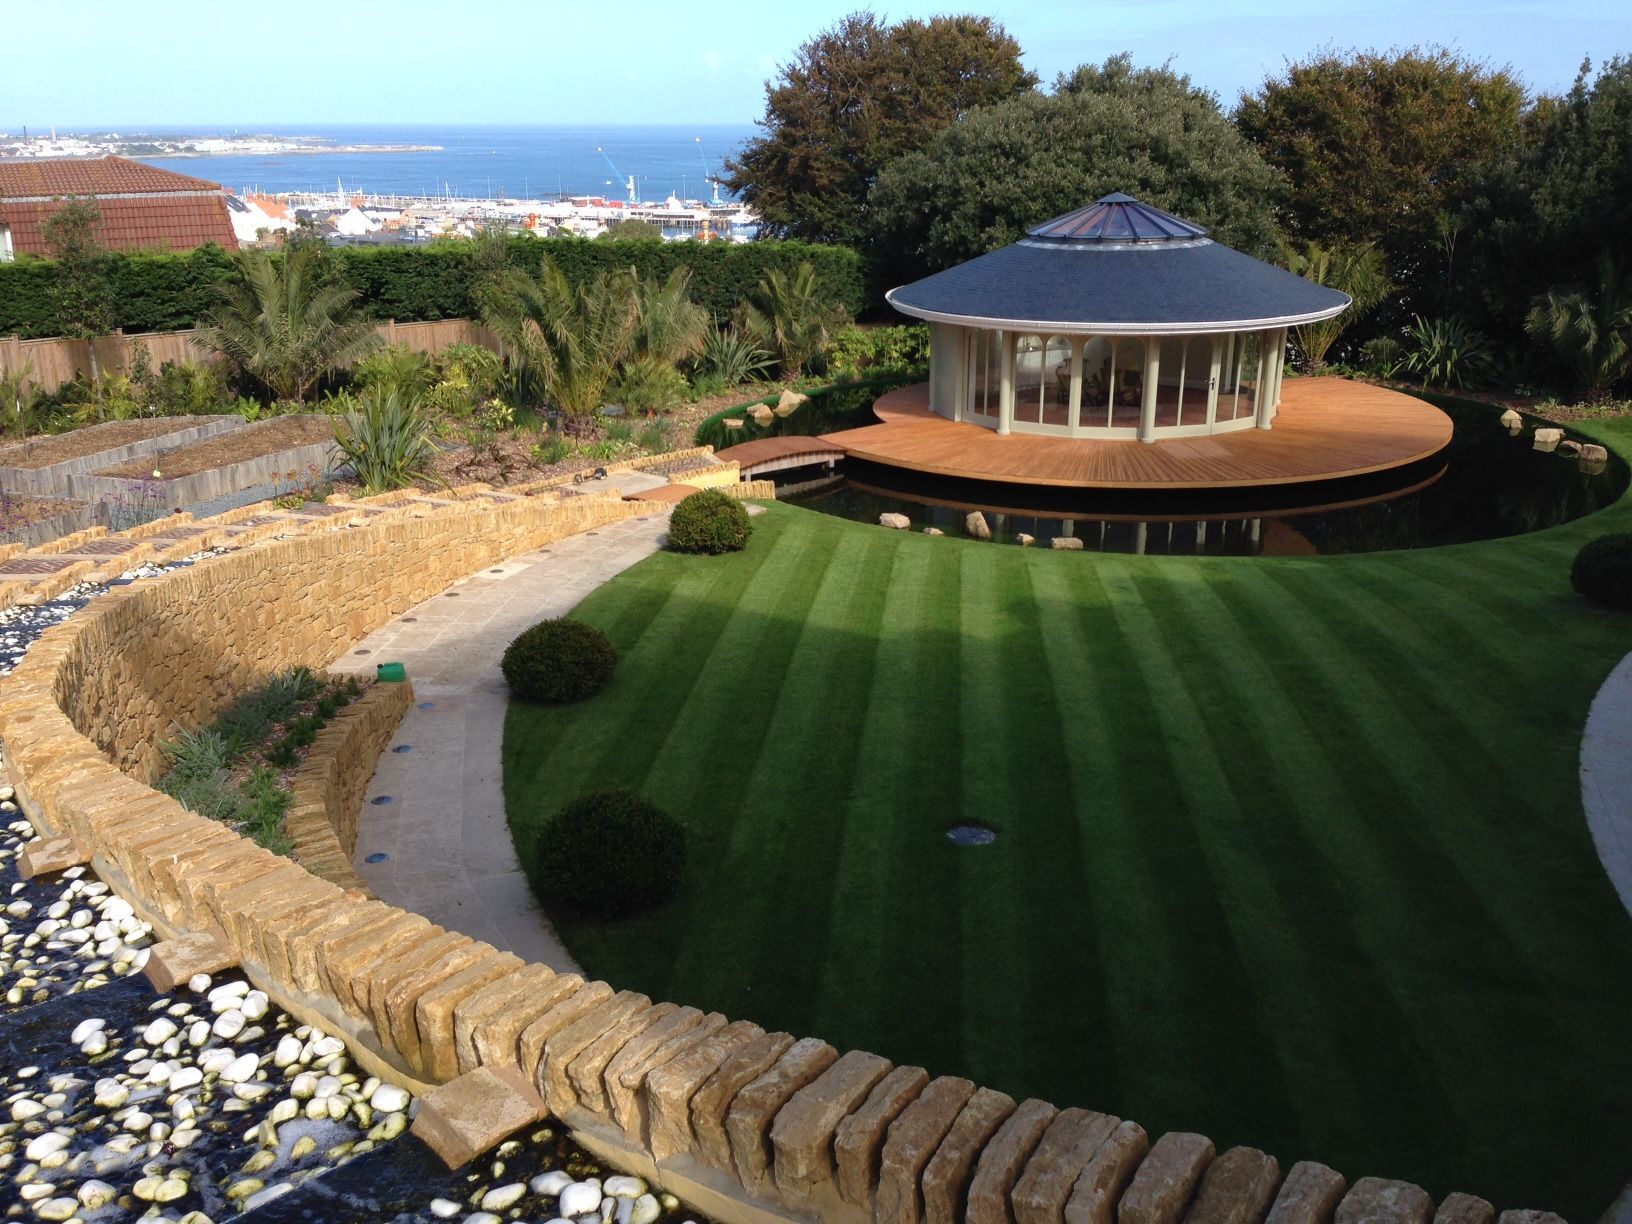 Enhance Your Landscape with Steel Lawn Edging | EverEdge